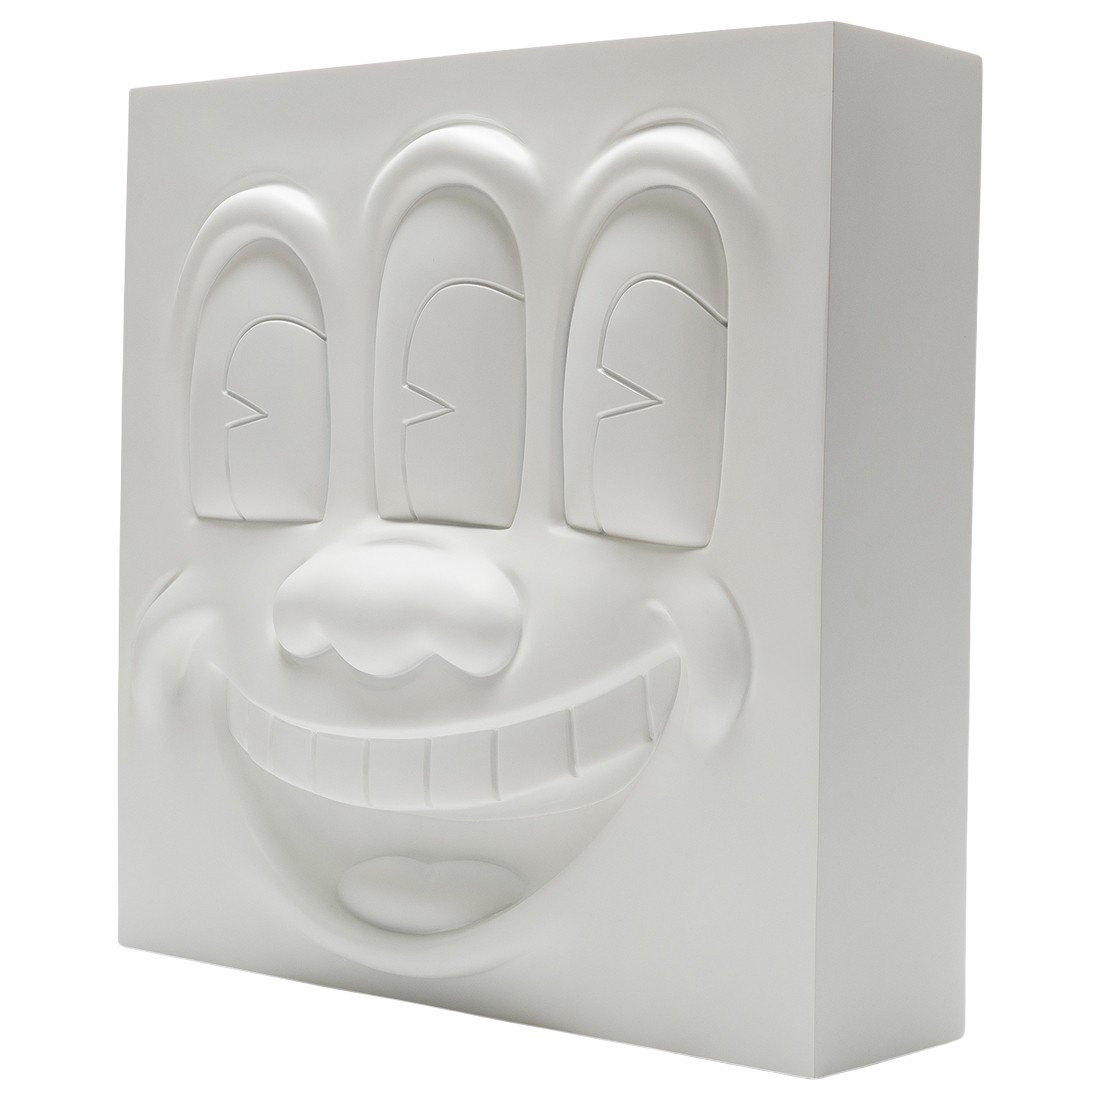 Medicom Keith Haring Three Eyed Smiling Face White Ver. Statue (white)